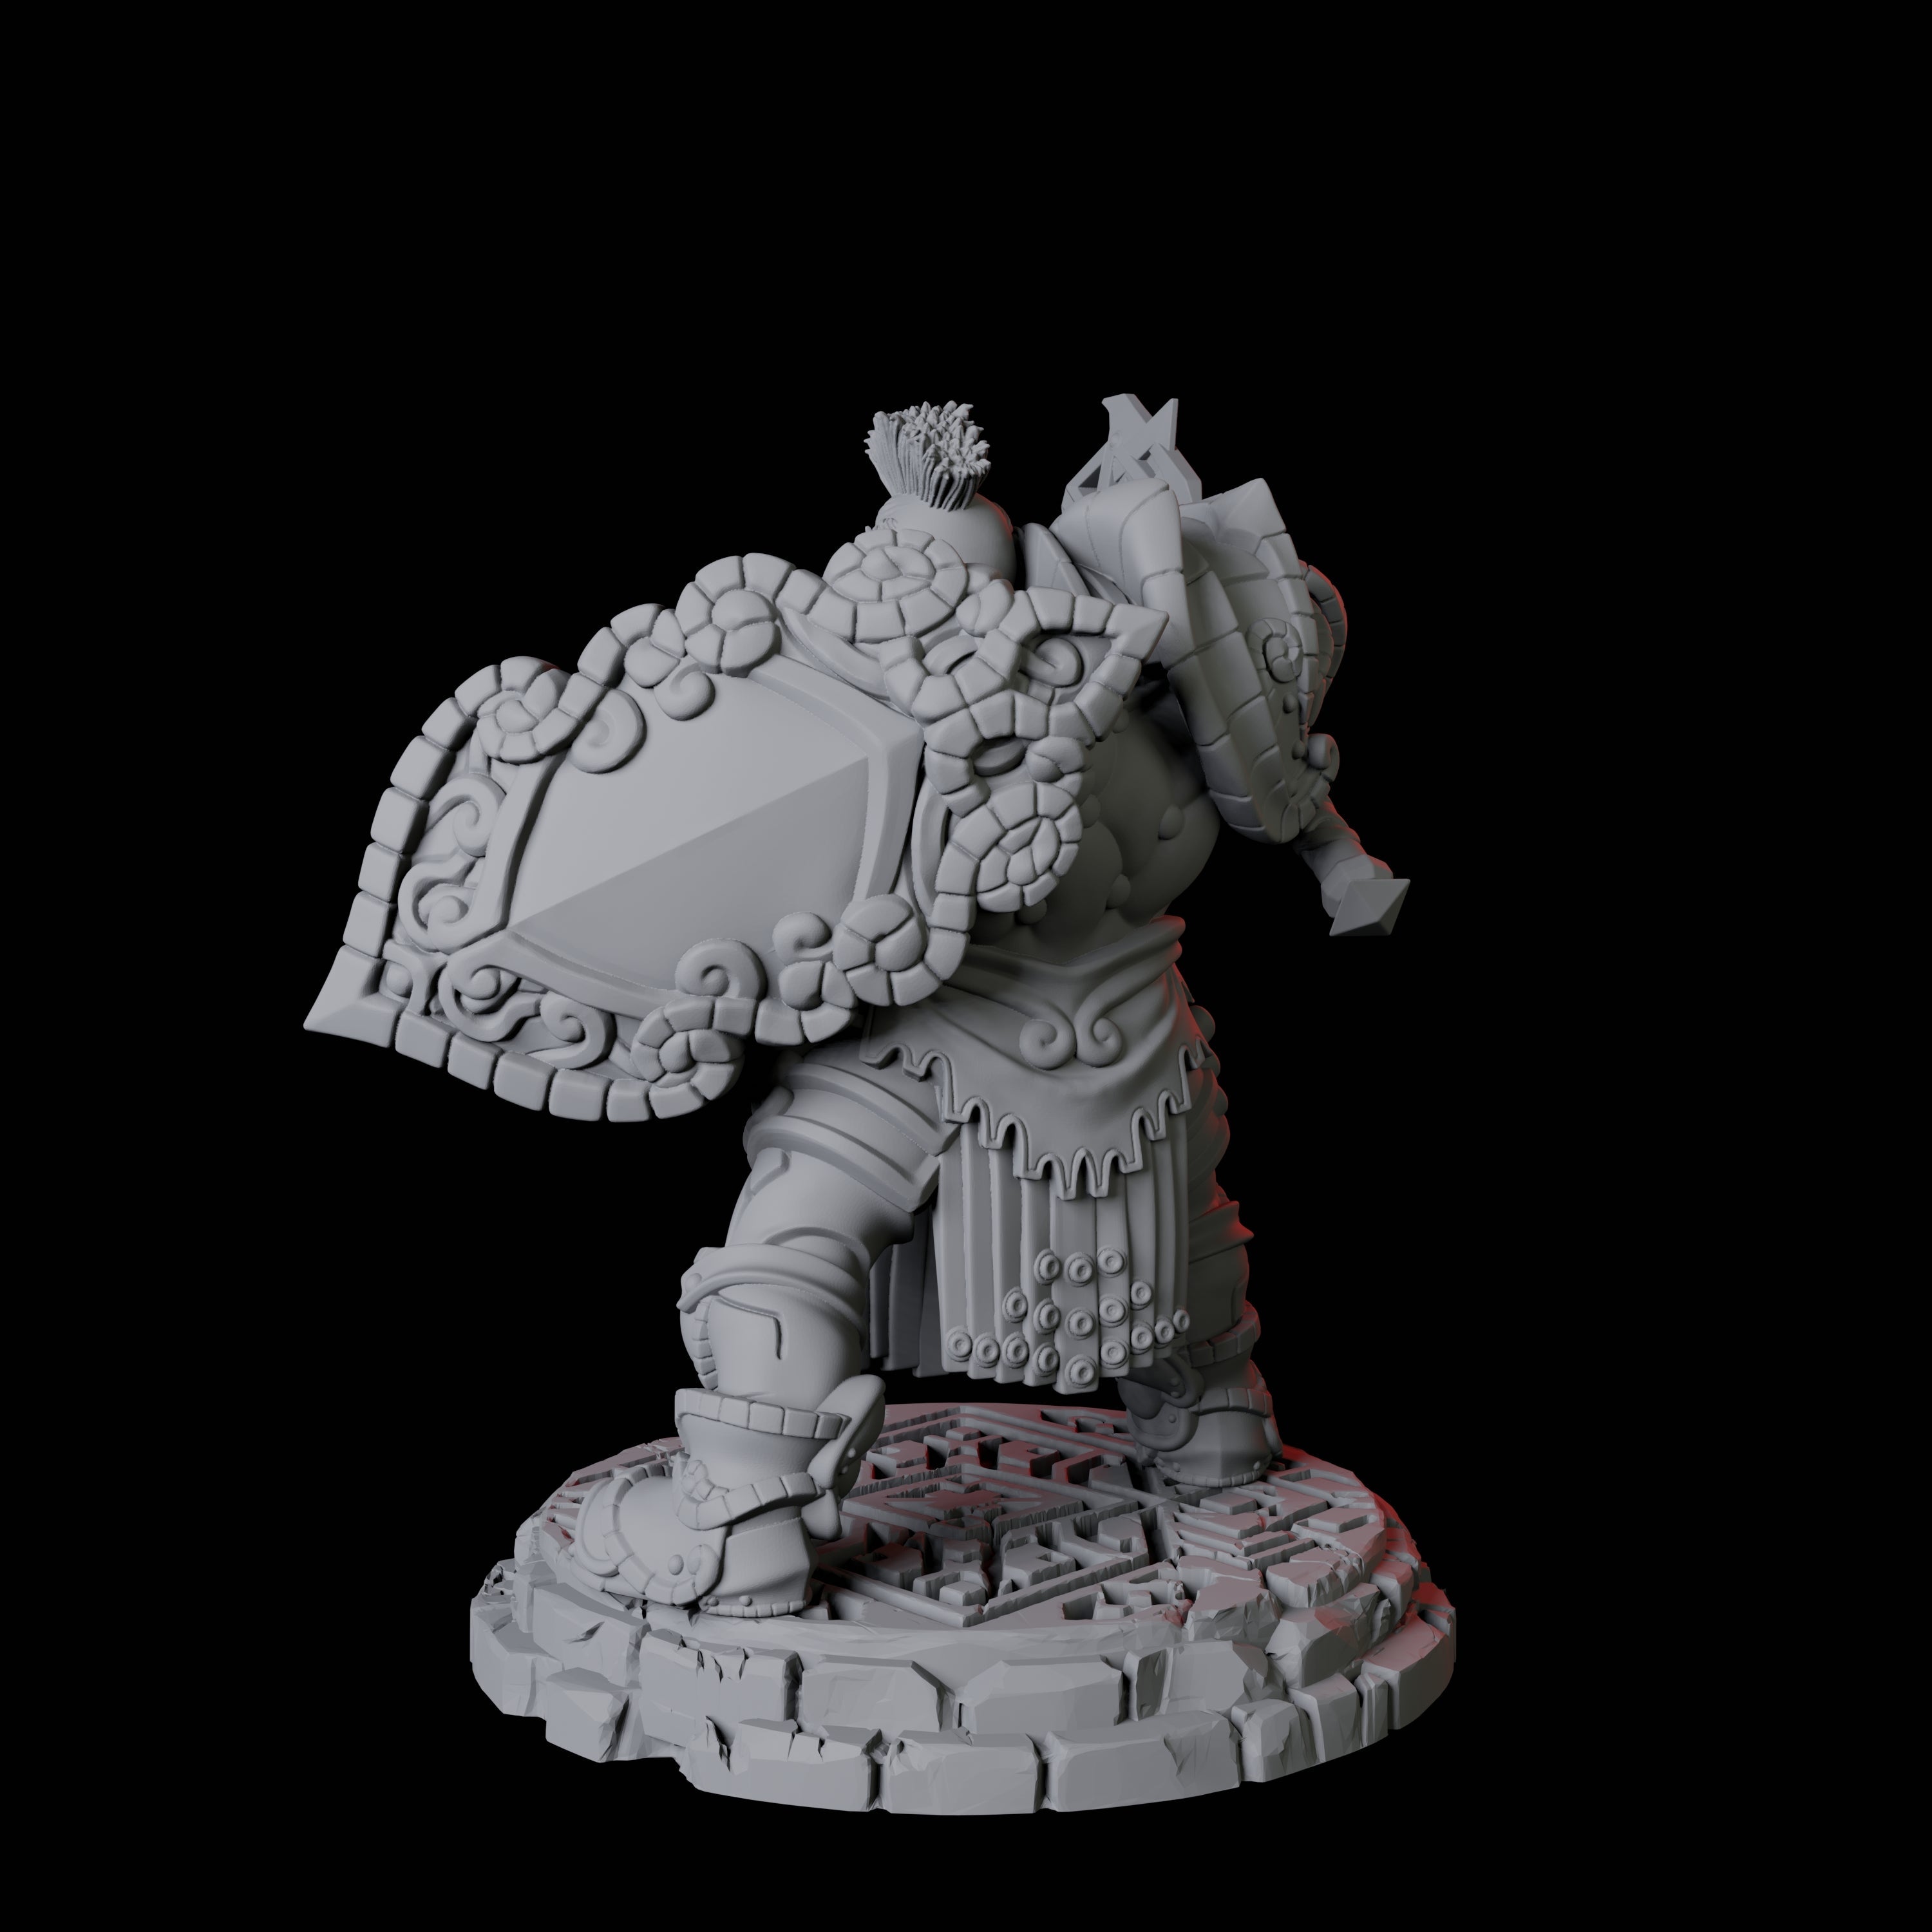 Heavy Armoured Dwarf Warrior E Miniature for Dungeons and Dragons, Pathfinder or other TTRPGs